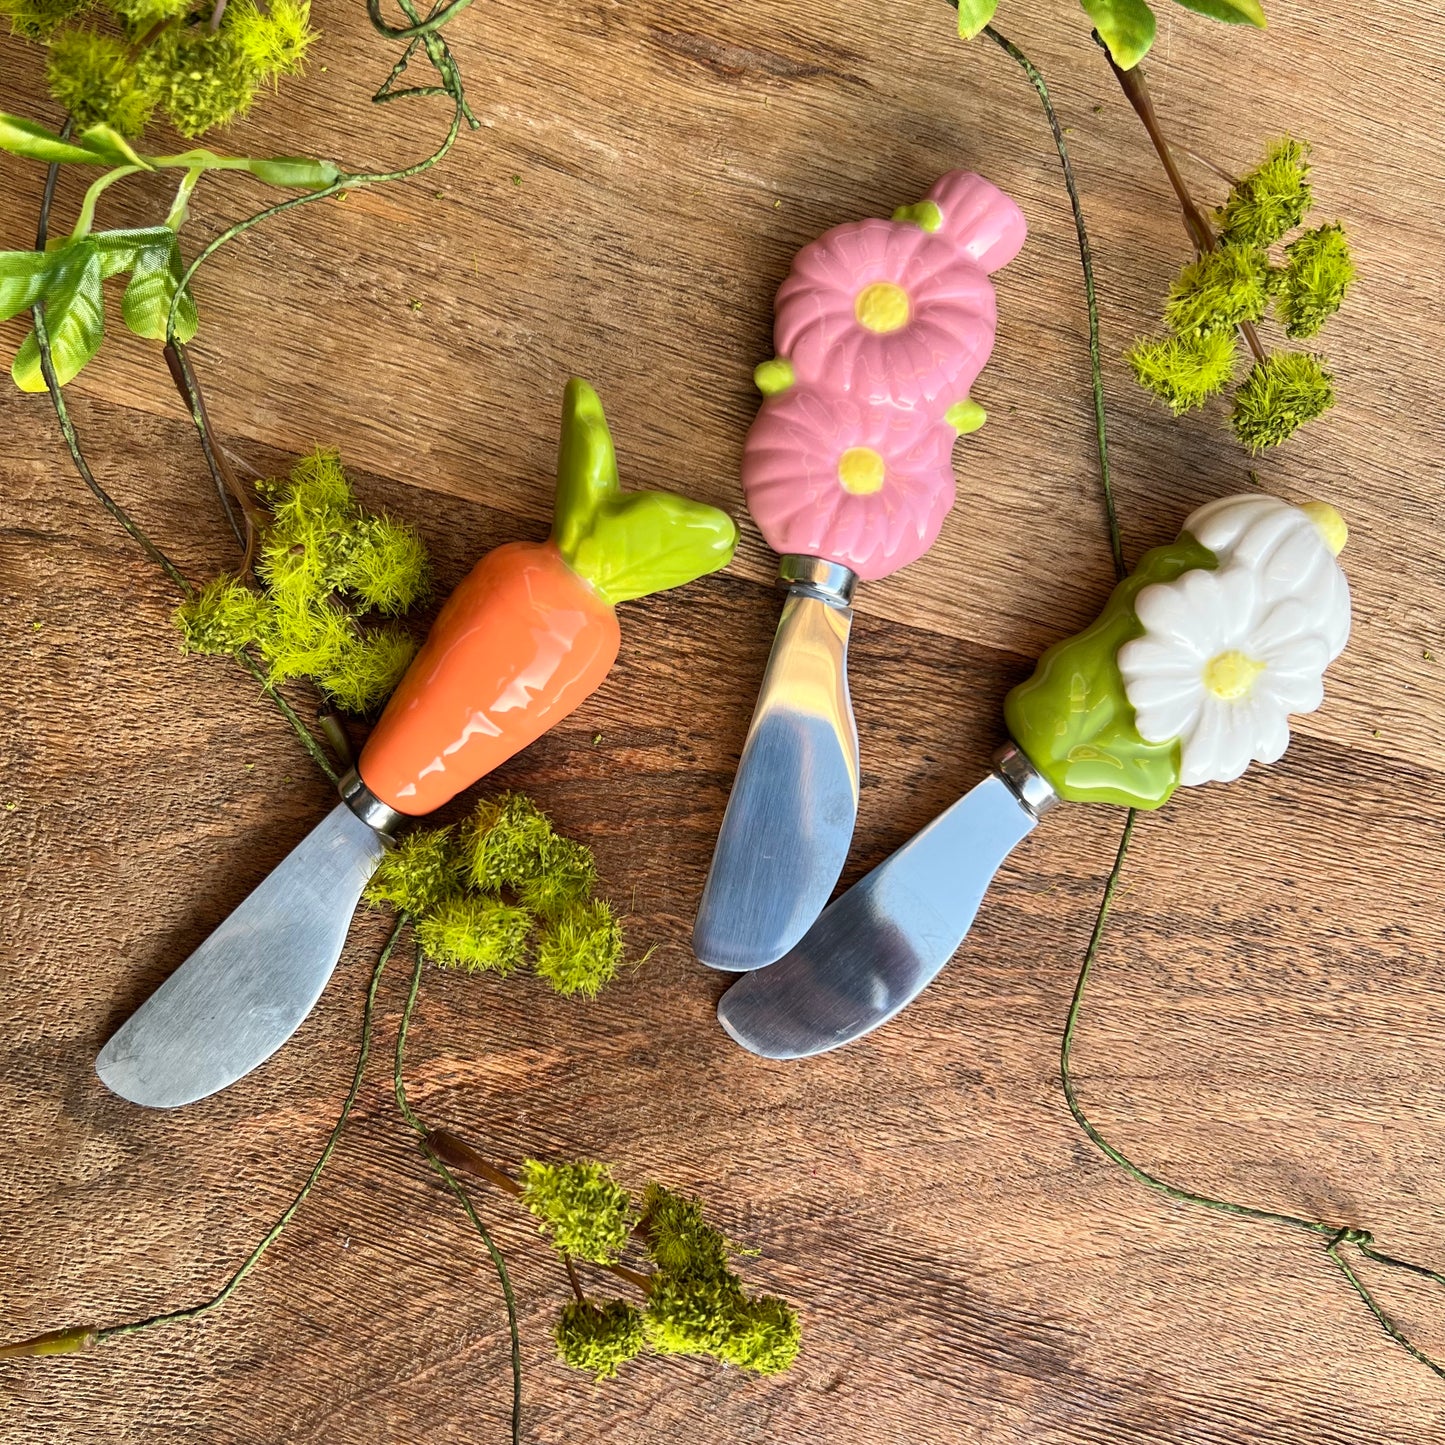 3 ceramic handled spreaders arranged on a wooden background with sprigs of greenery.